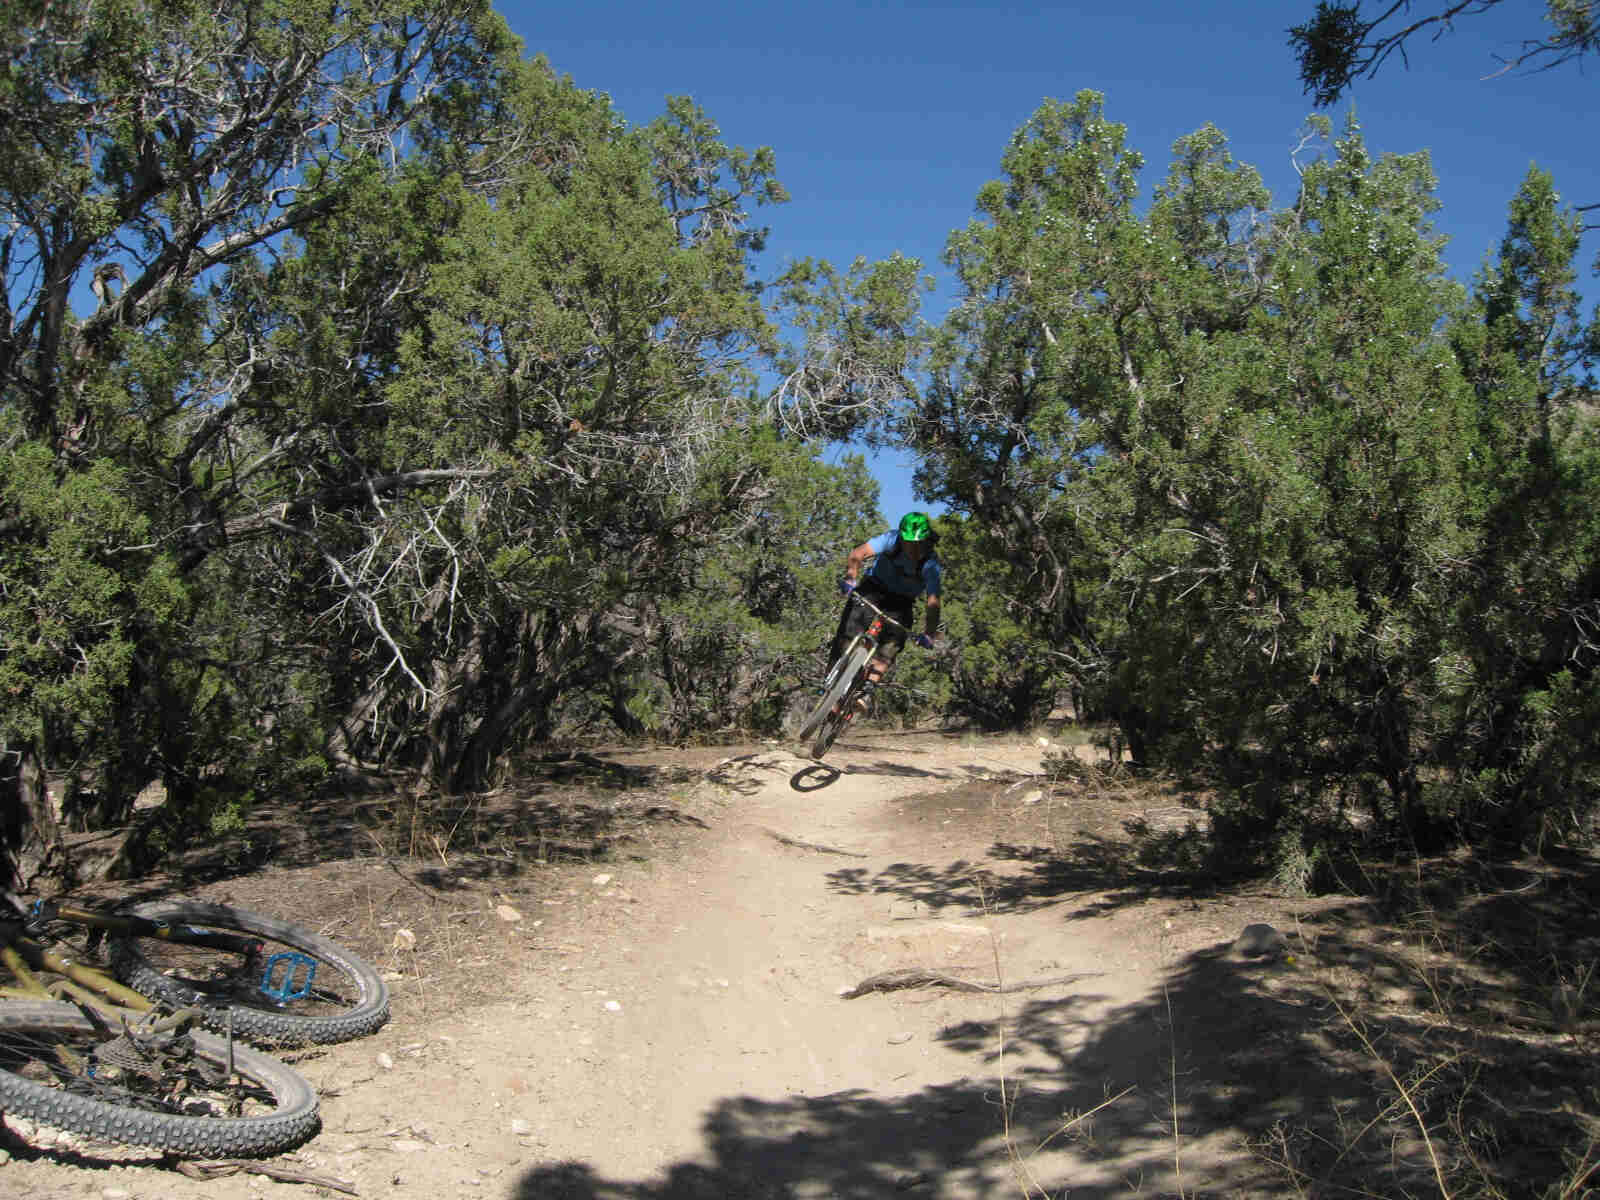 Front view of a cyclist, jumping their Surly bike from a small mound on a dirt trail, with small trees all around